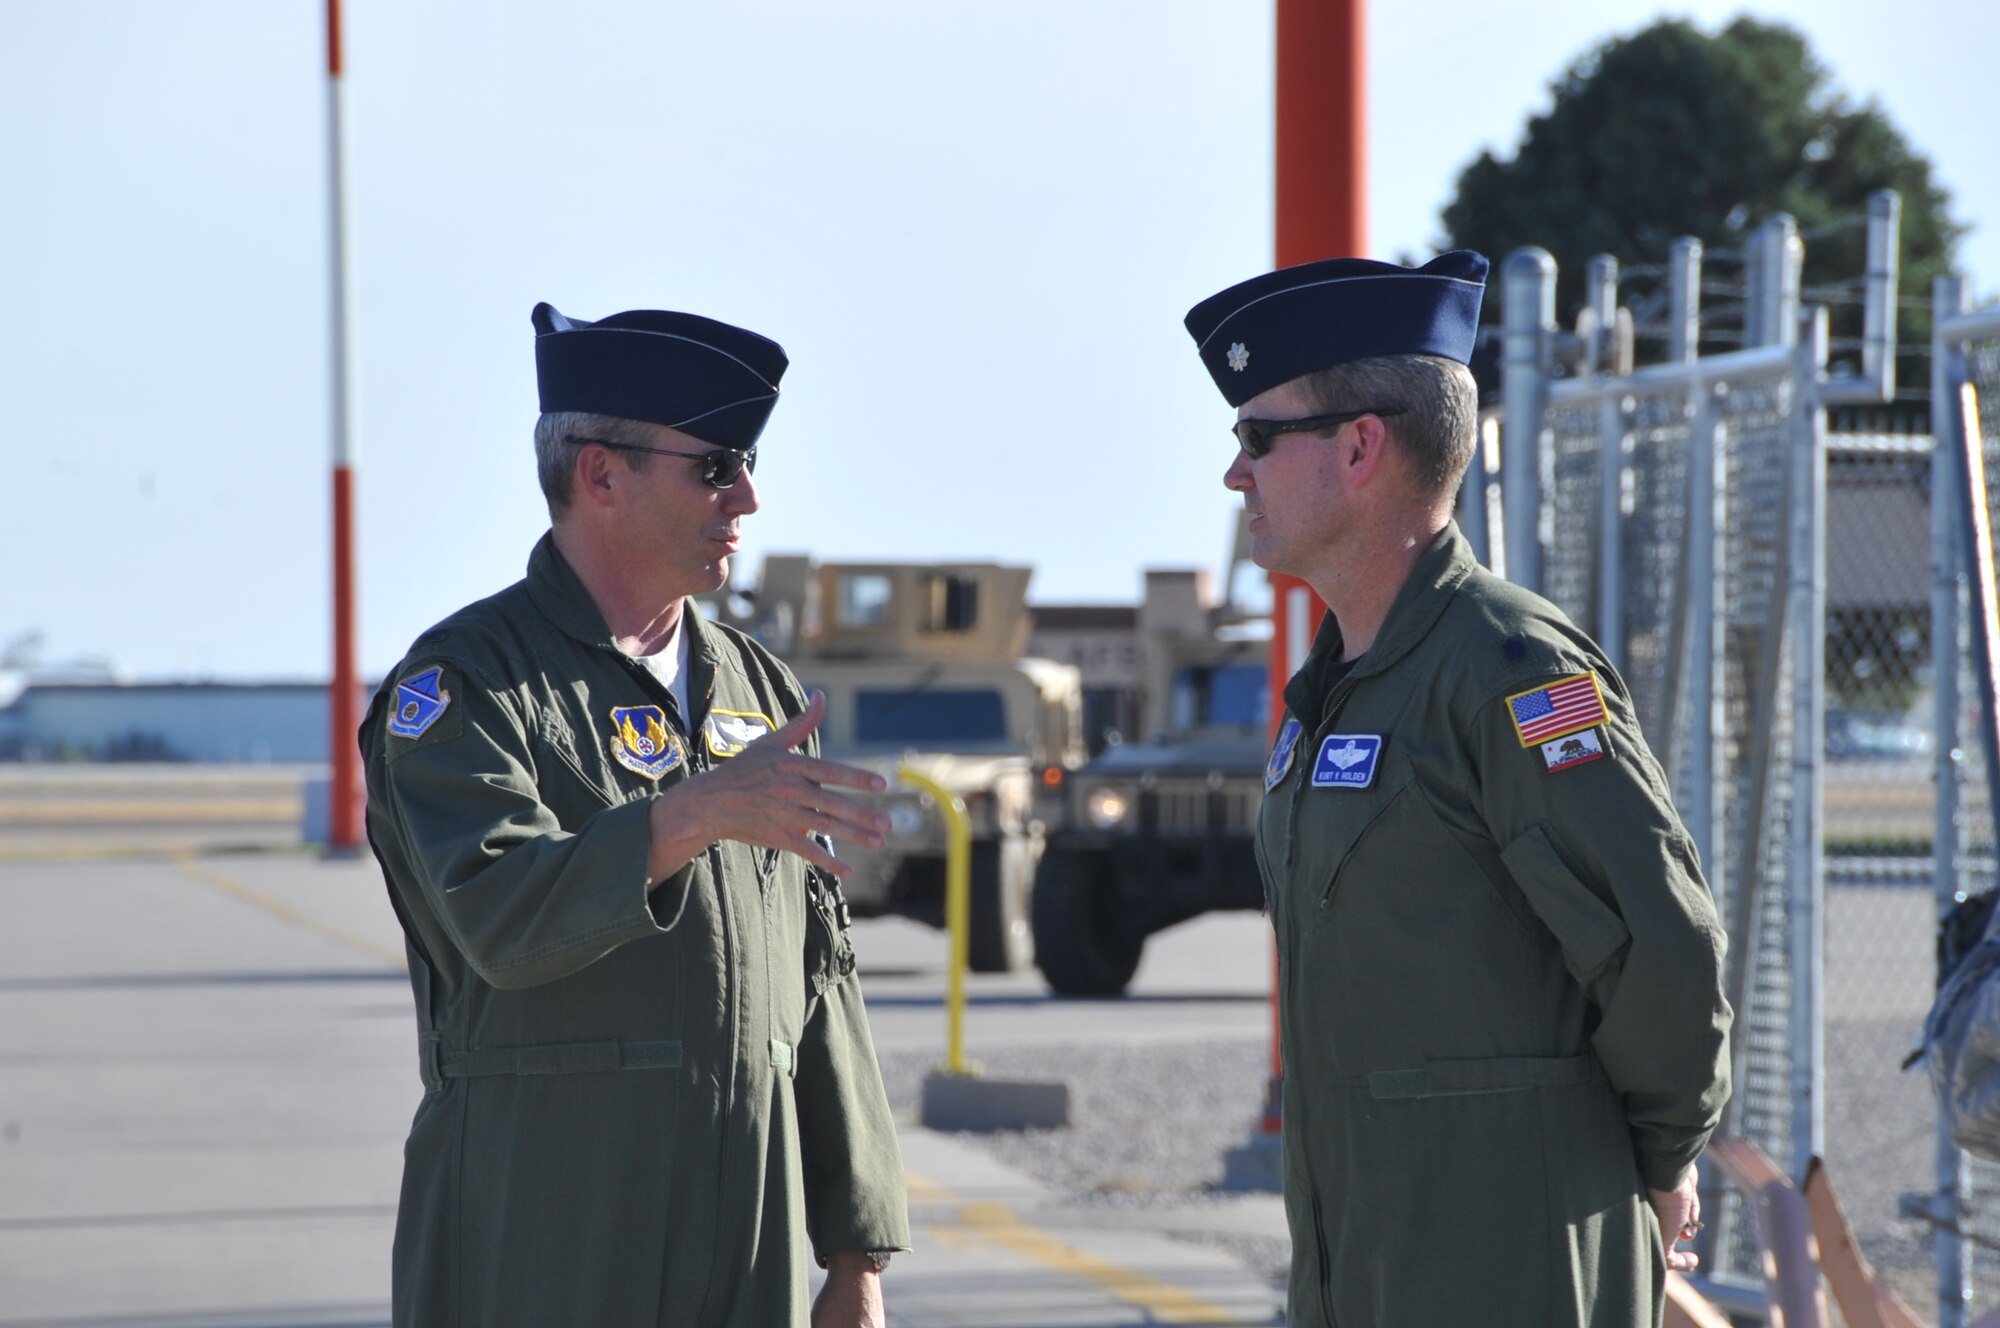 Col. Robert Maness, 377th Air Base Wing commander, Kirtland Air Force Base, N.M., left, briefs Lt. Col. Kurt Holden, 115th Airlift Squadron commander, California Air National Guard, Channel Islands Air National Guard Station, Calif., on local conditions on the Kirtland AFB flightline June 15. (Air Force photo by Elizabeth Martinez.) 